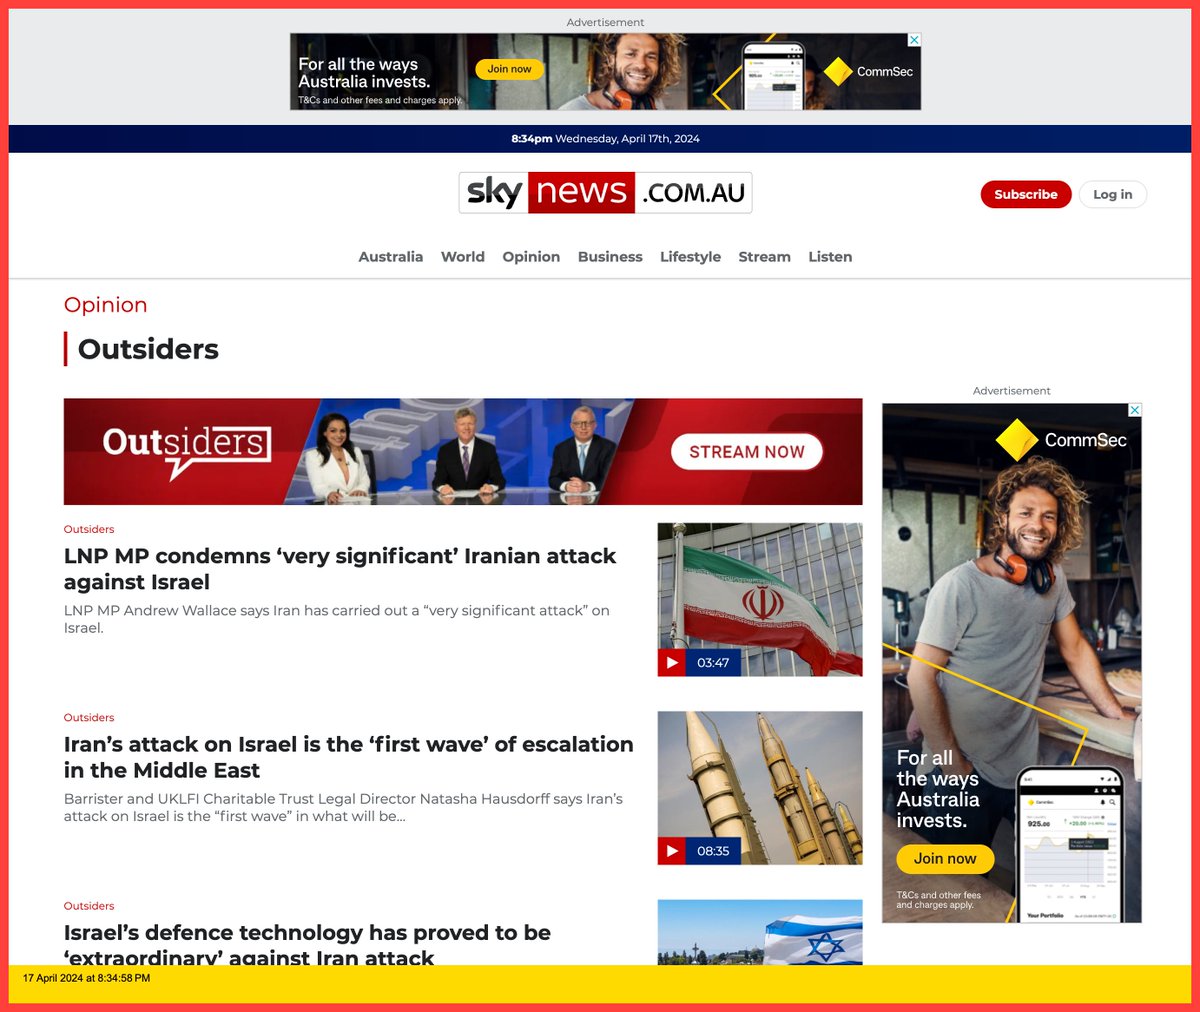 @CommSec, is it fair to suggest that you are comfortable with vilifying rape victims? Your advertising supporting online hate at Sky News Australia after Dark indicates this. Is it not time to take a serious look at your corporate values? @slpng_giants_oz #Lehrmann